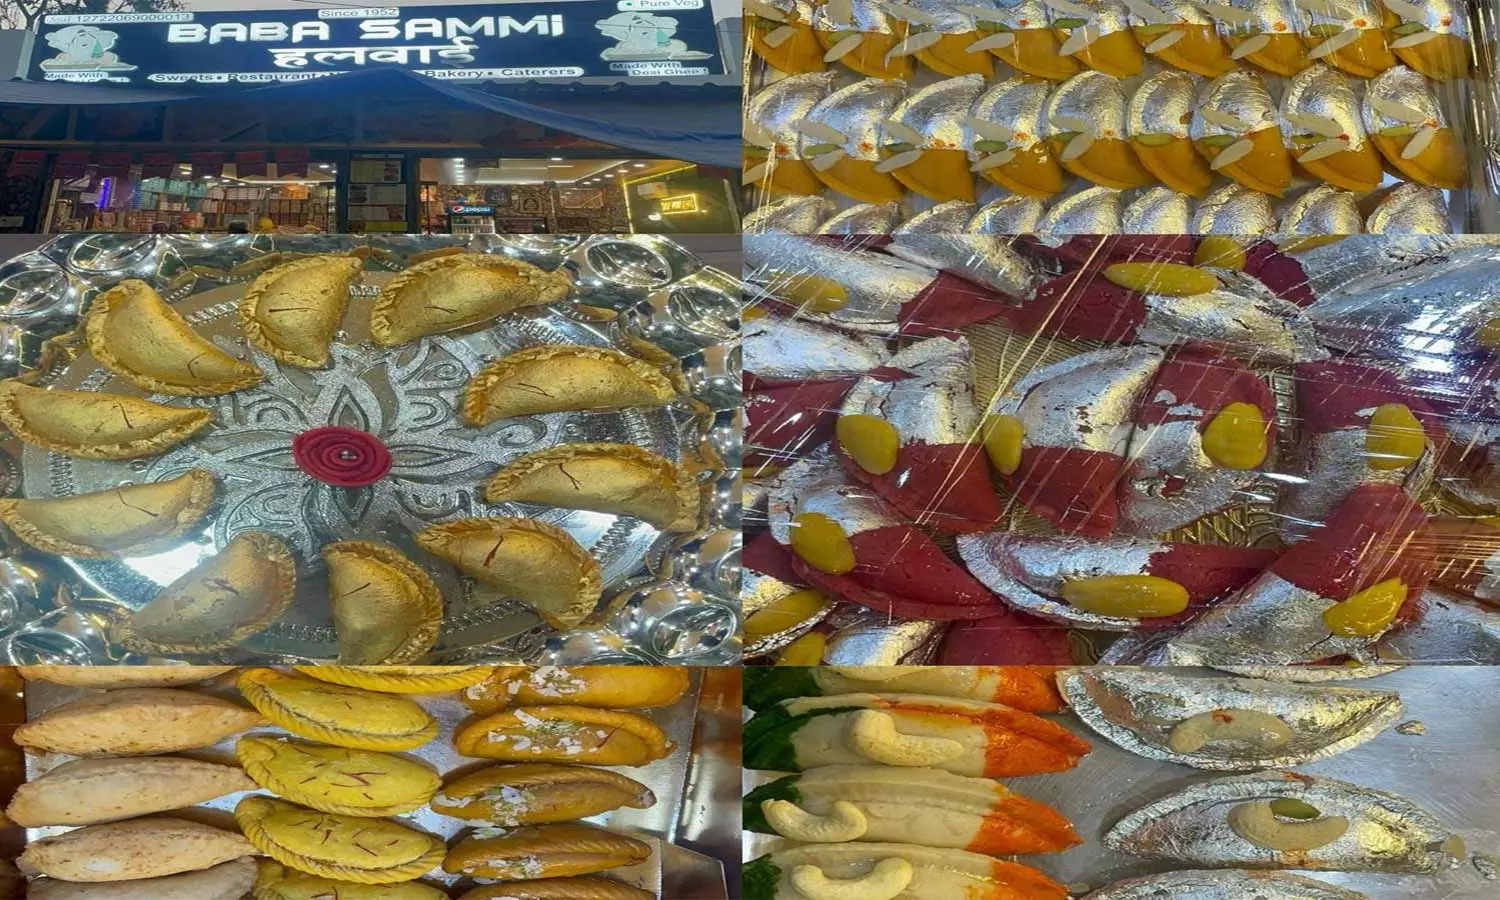 Golden Gujhiya became the center of attraction at Baba Sammis place, know how much this Gujhiya costs